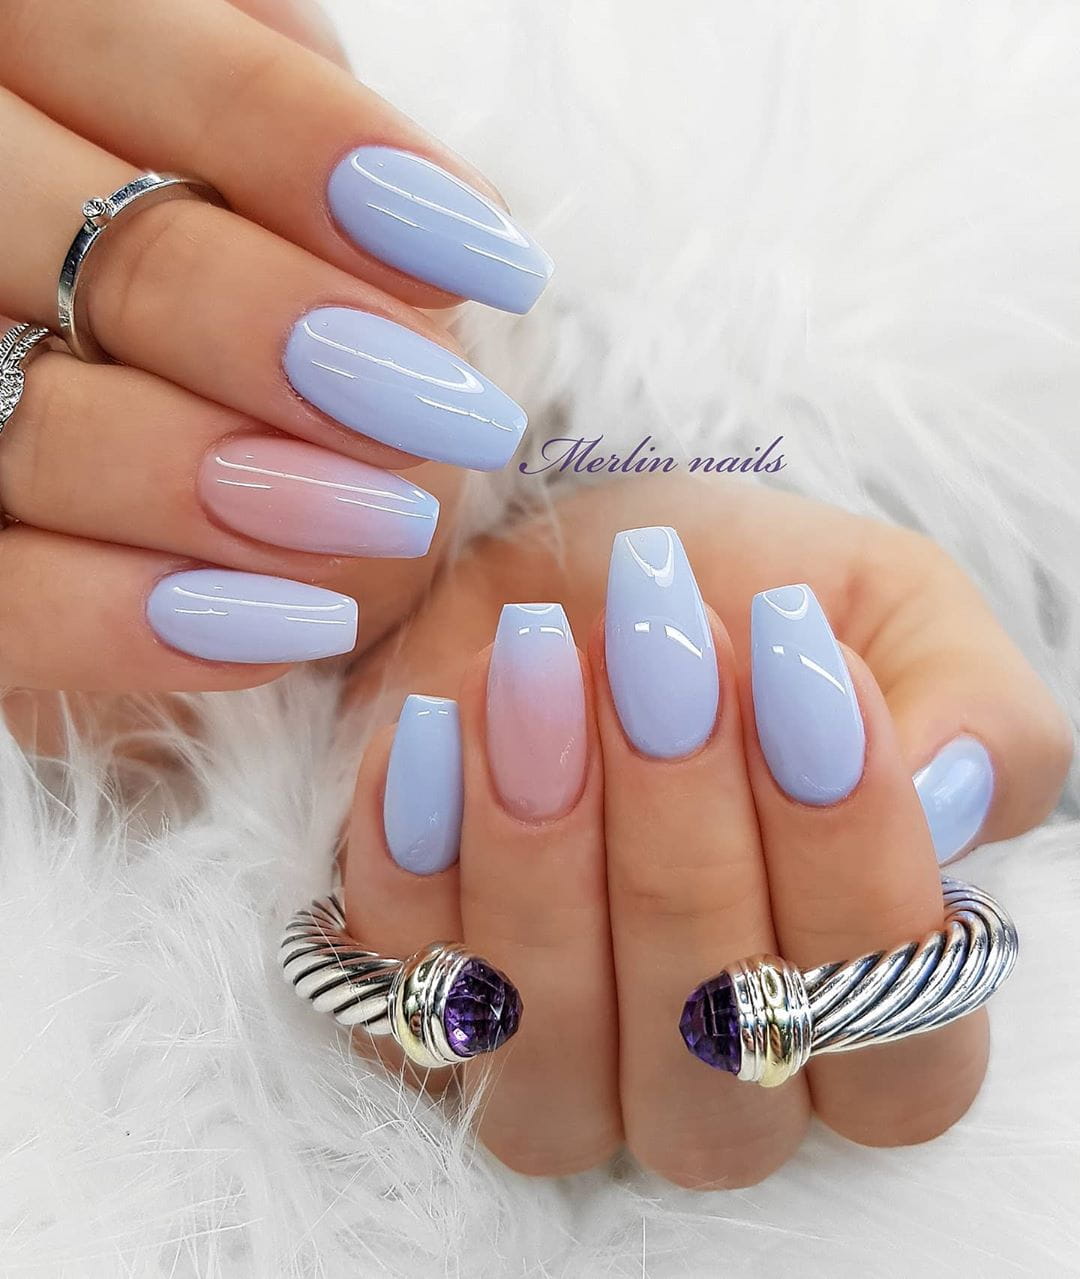 Over 100 Bright Summer Nail Art Designs That Will Be So Trendy images 63